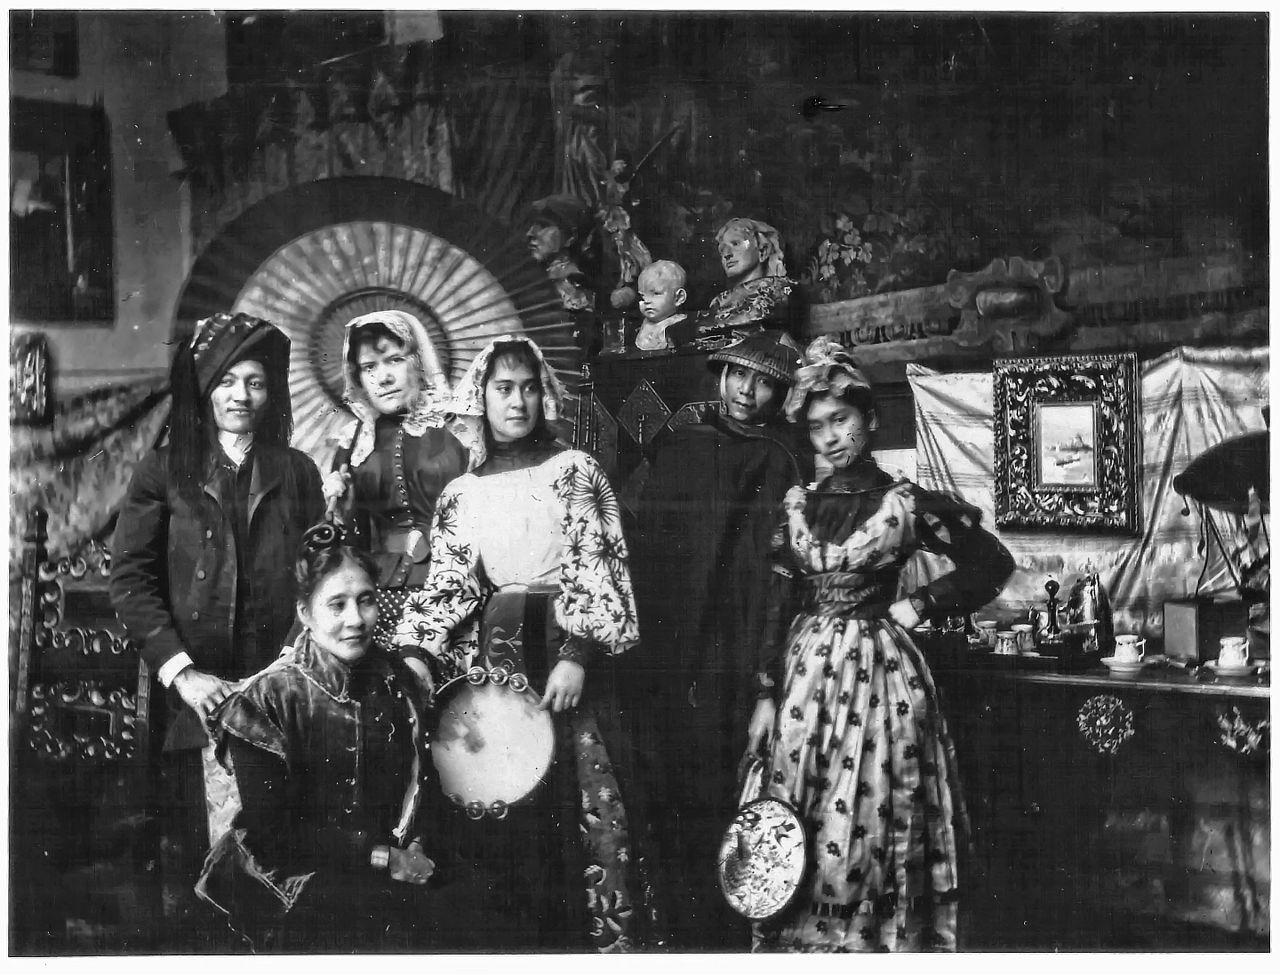 Paz Pardo de Tavera (second-most from the left, back), with José Rizal (left-most) and friends